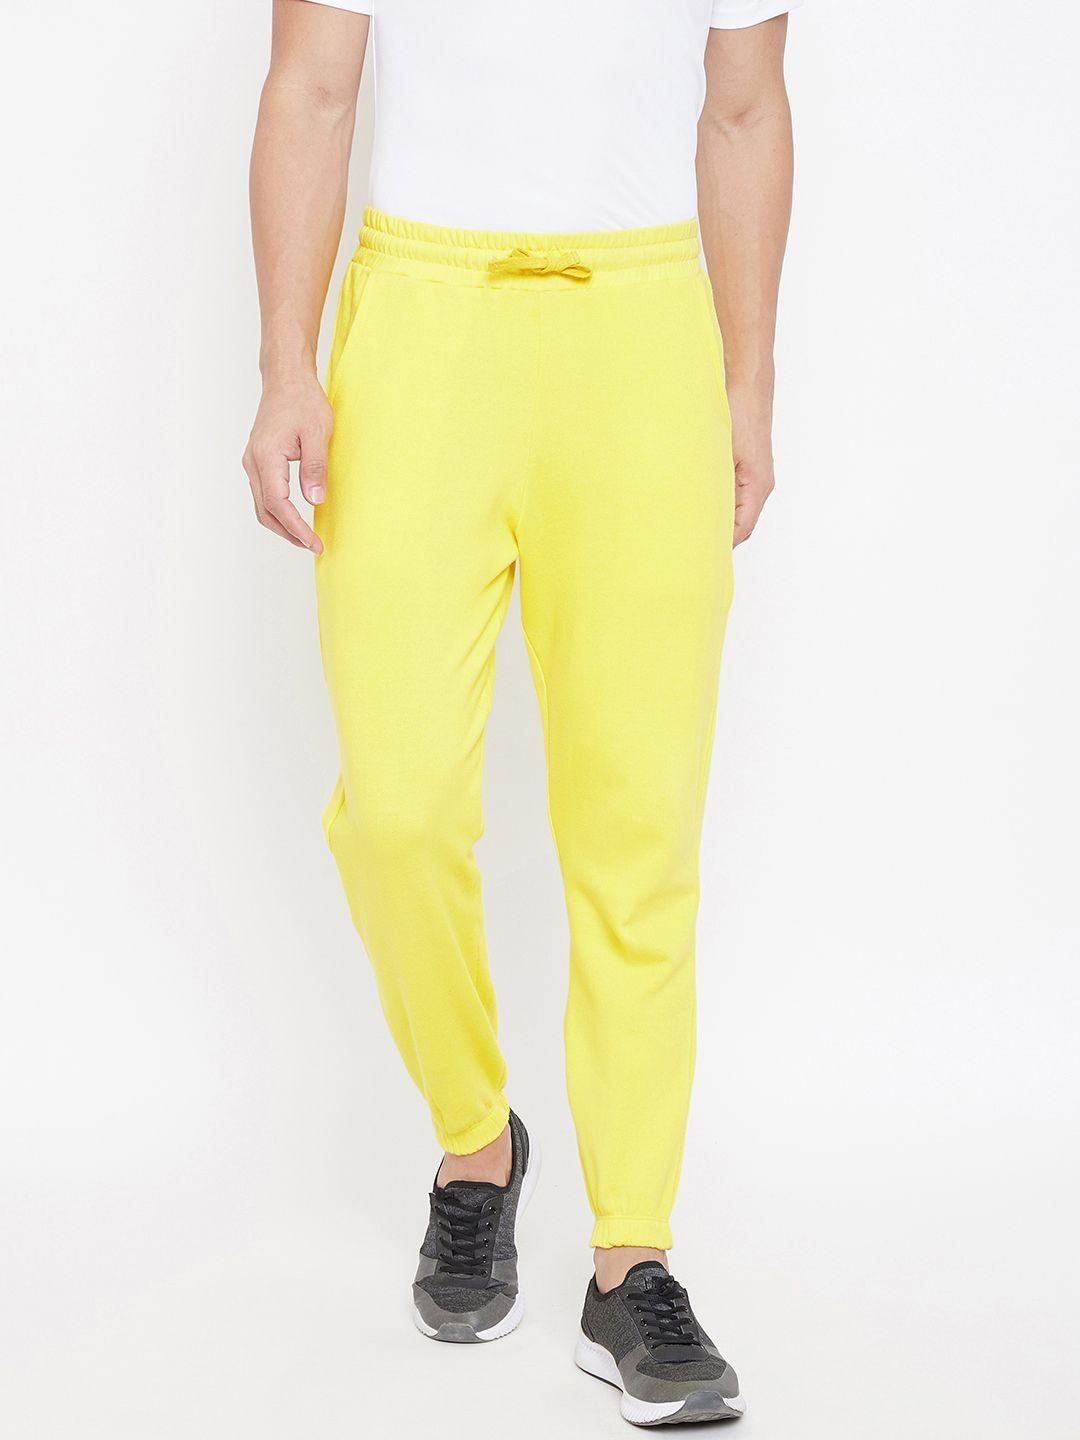 aesthetic bodies men yellow solid joggers